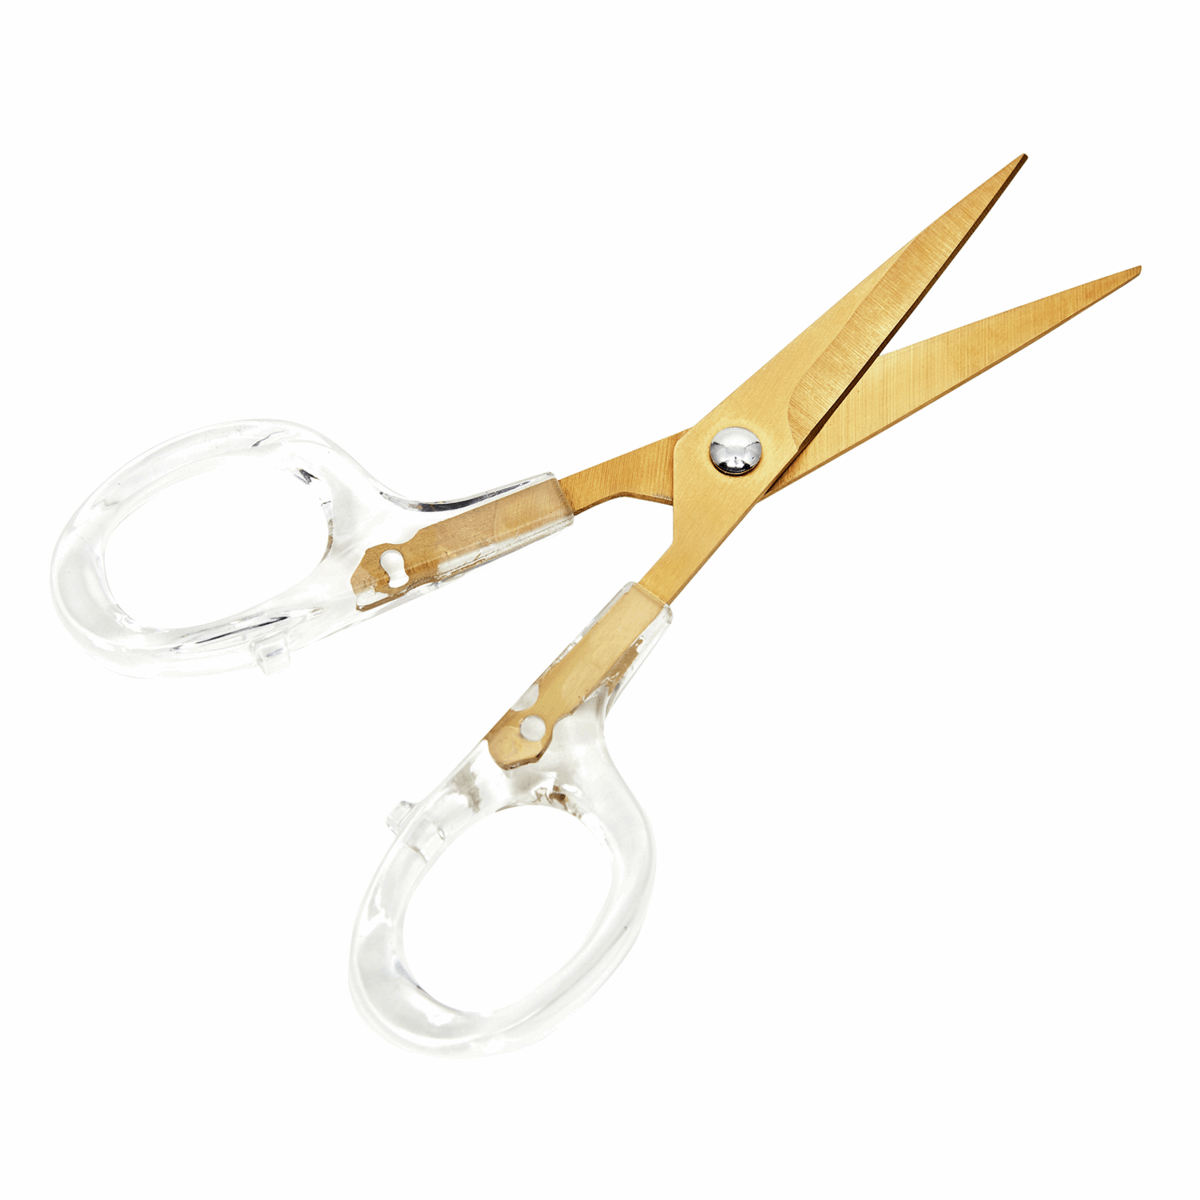 Premium Brushed Gold Embroidery Scissors - 12.5cm/5in *Hemline Gold Edition*